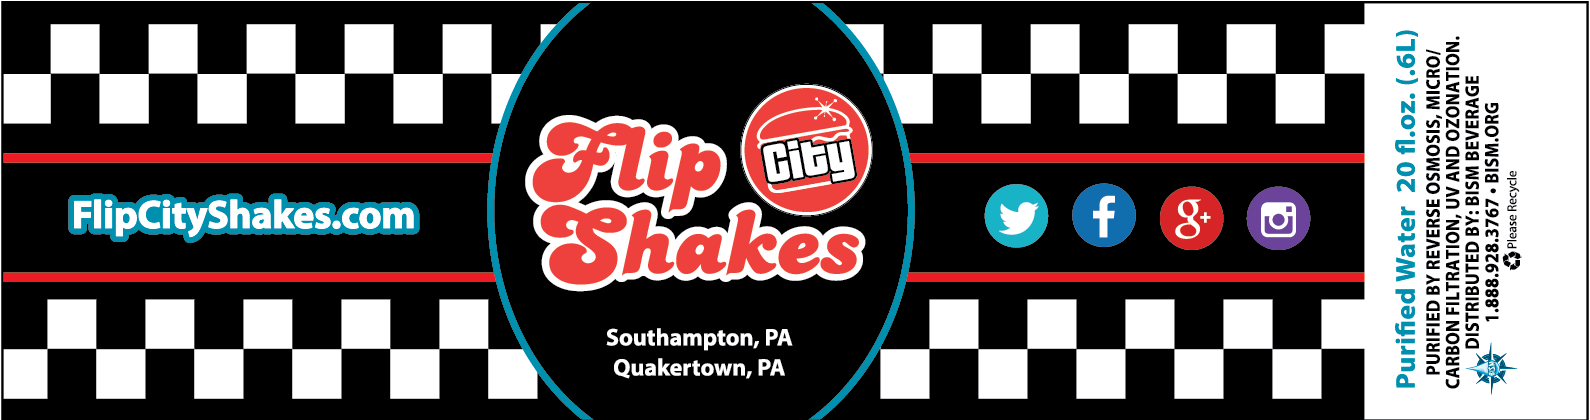 Flip City Shakes label - race checkerflag pattern with black circle in middle with name and logo in red